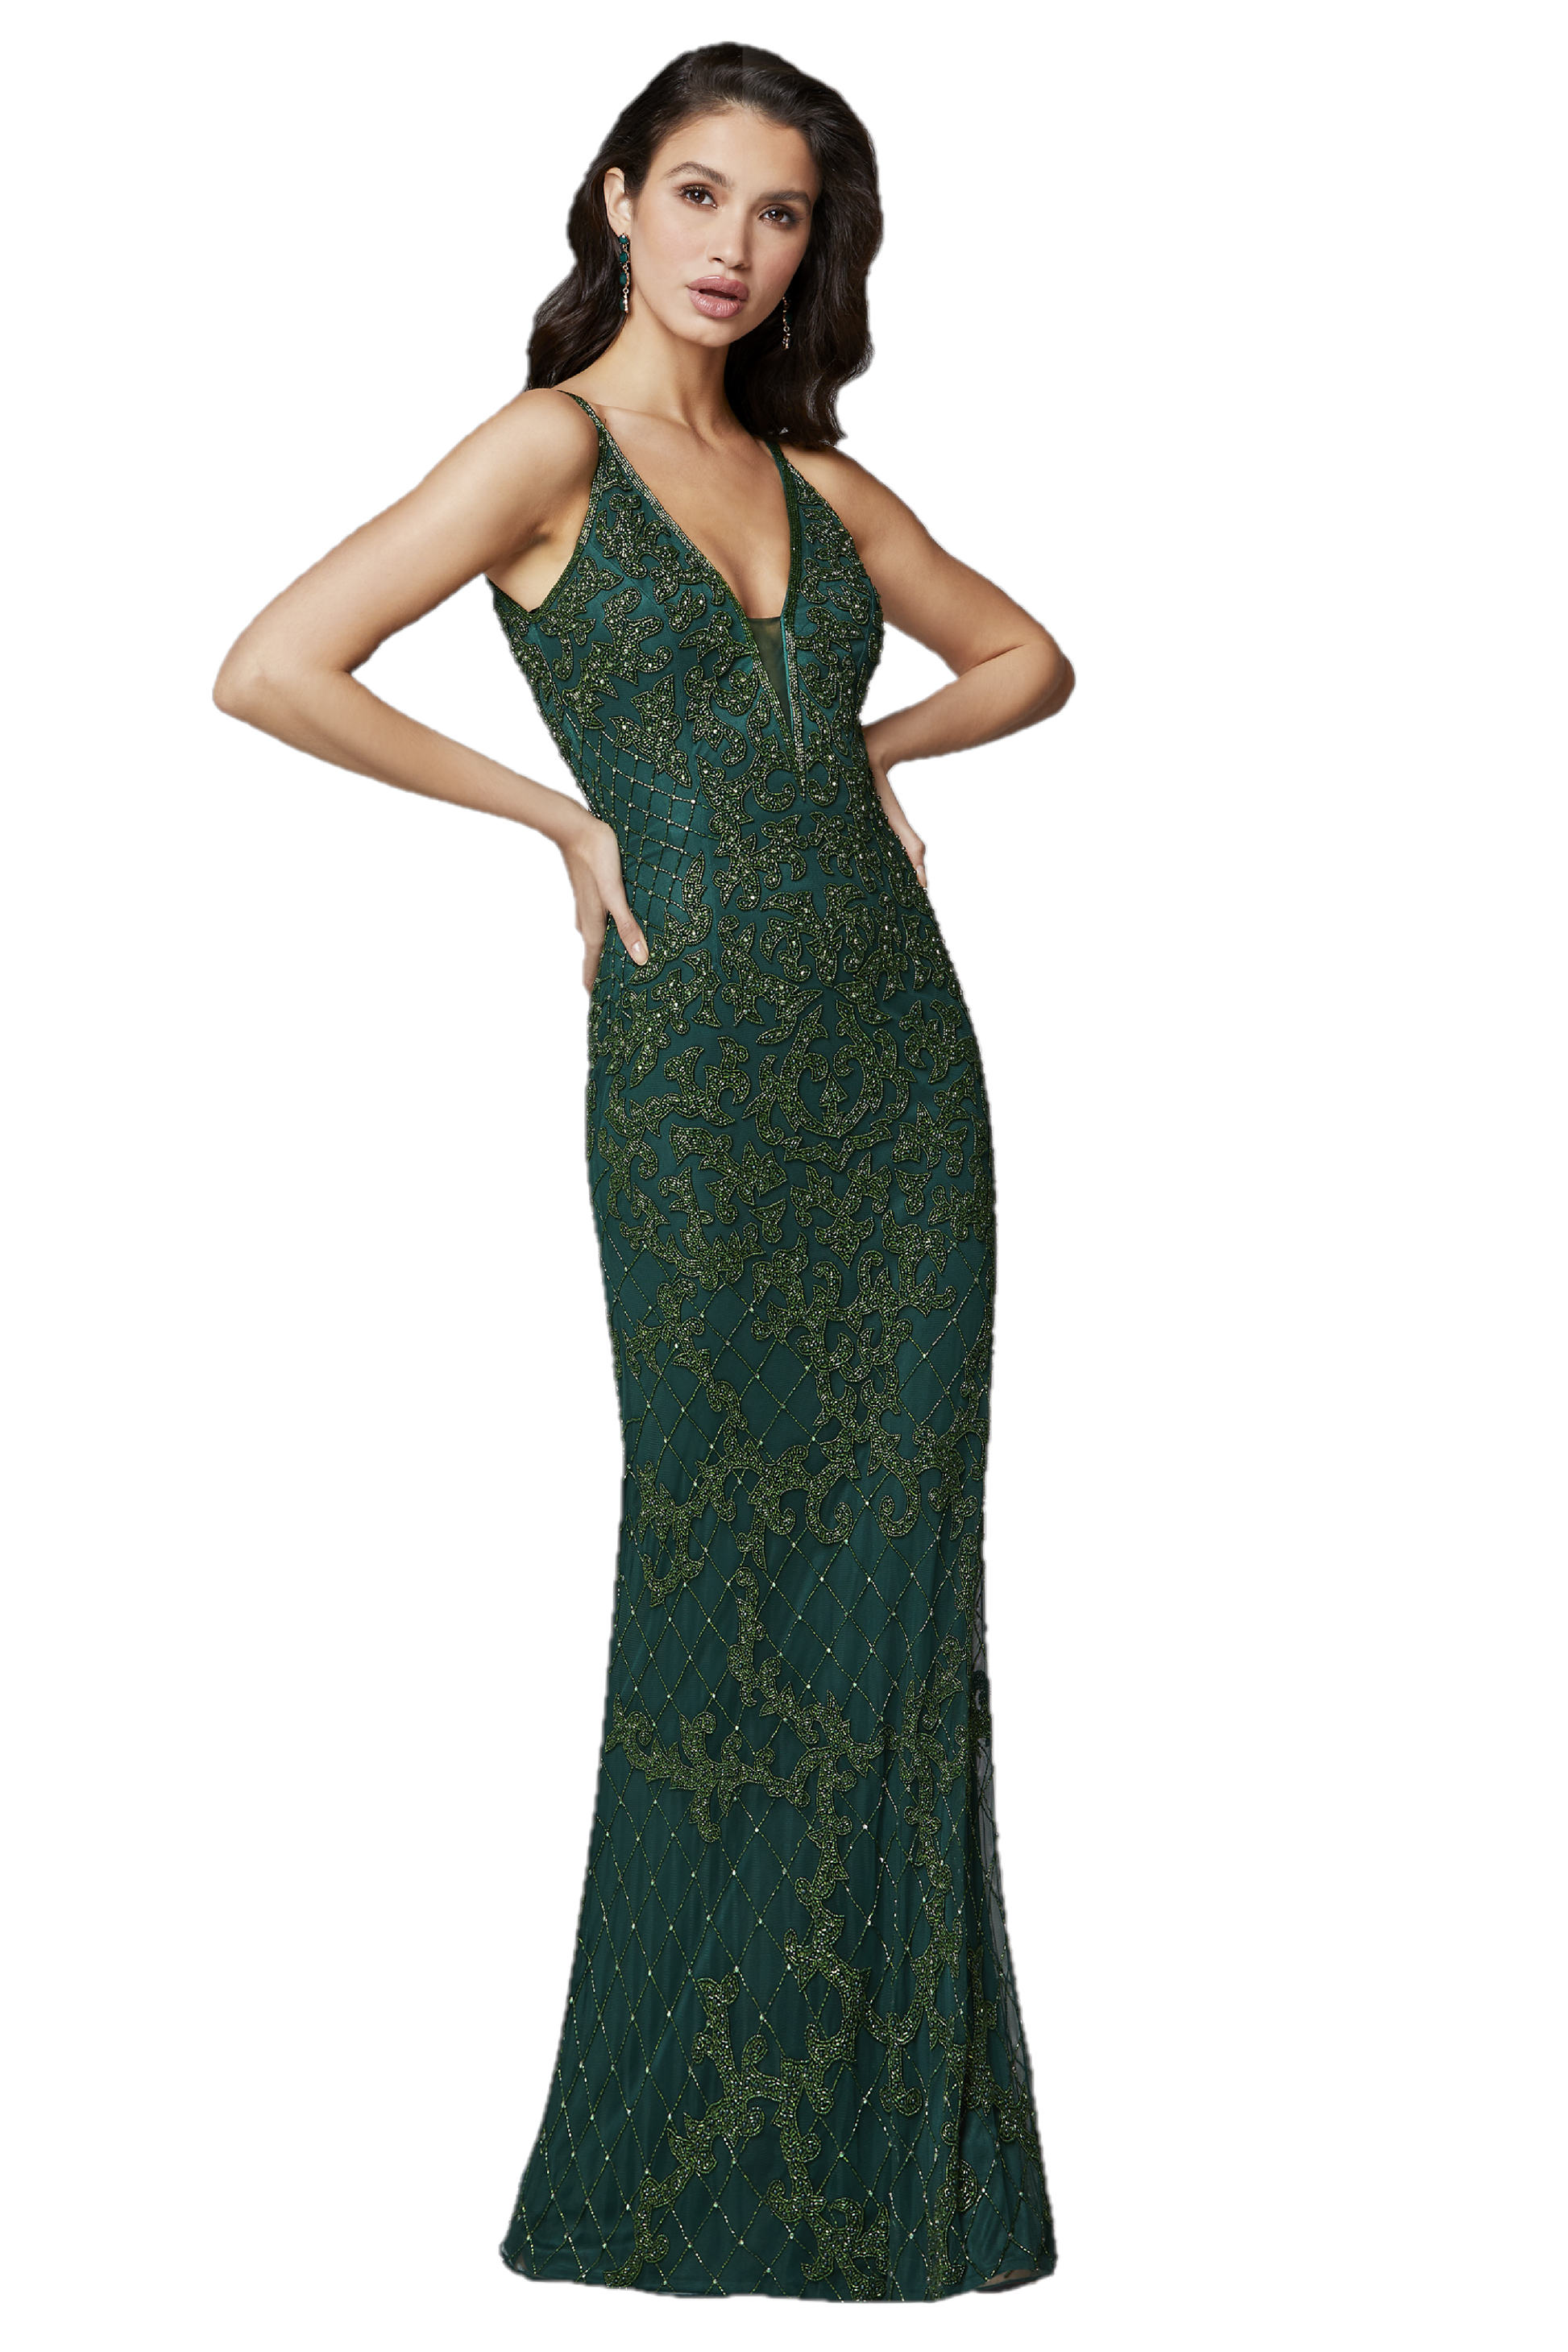 Primavera Couture 3433 is a 2020 Prom Dress, Pageant Gown, Wedding Dress & Formal Evening Wear gown. plunging neckline with mesh panel fully beaded pageant gown or evening dress. Fully Beaded & Embellished  Available colors: Black, Blush, Bottle Green, Ivory, Lilac, Platinum, Powder Blue, Yellow  Available sizes:  00,0,2,4,6,8,10,12,14,16,18